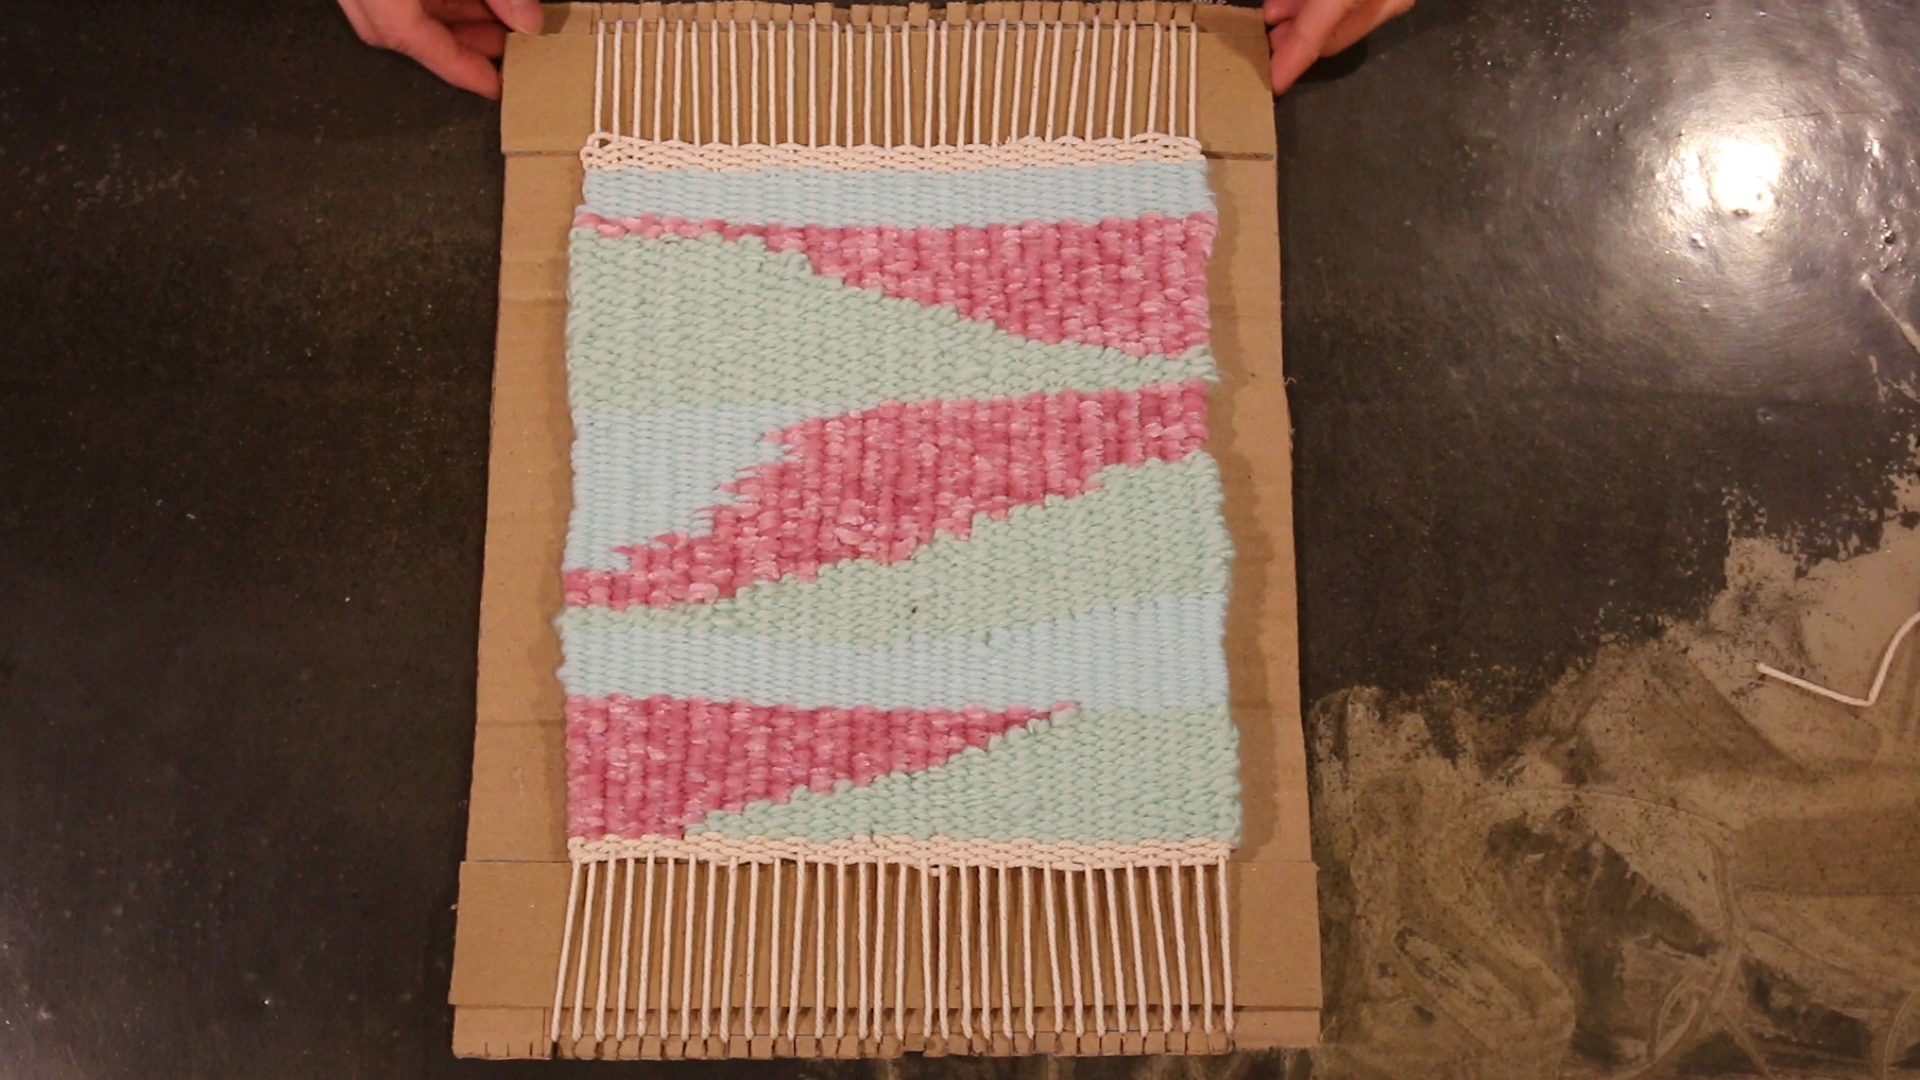 woven tapestry on a home-made loom